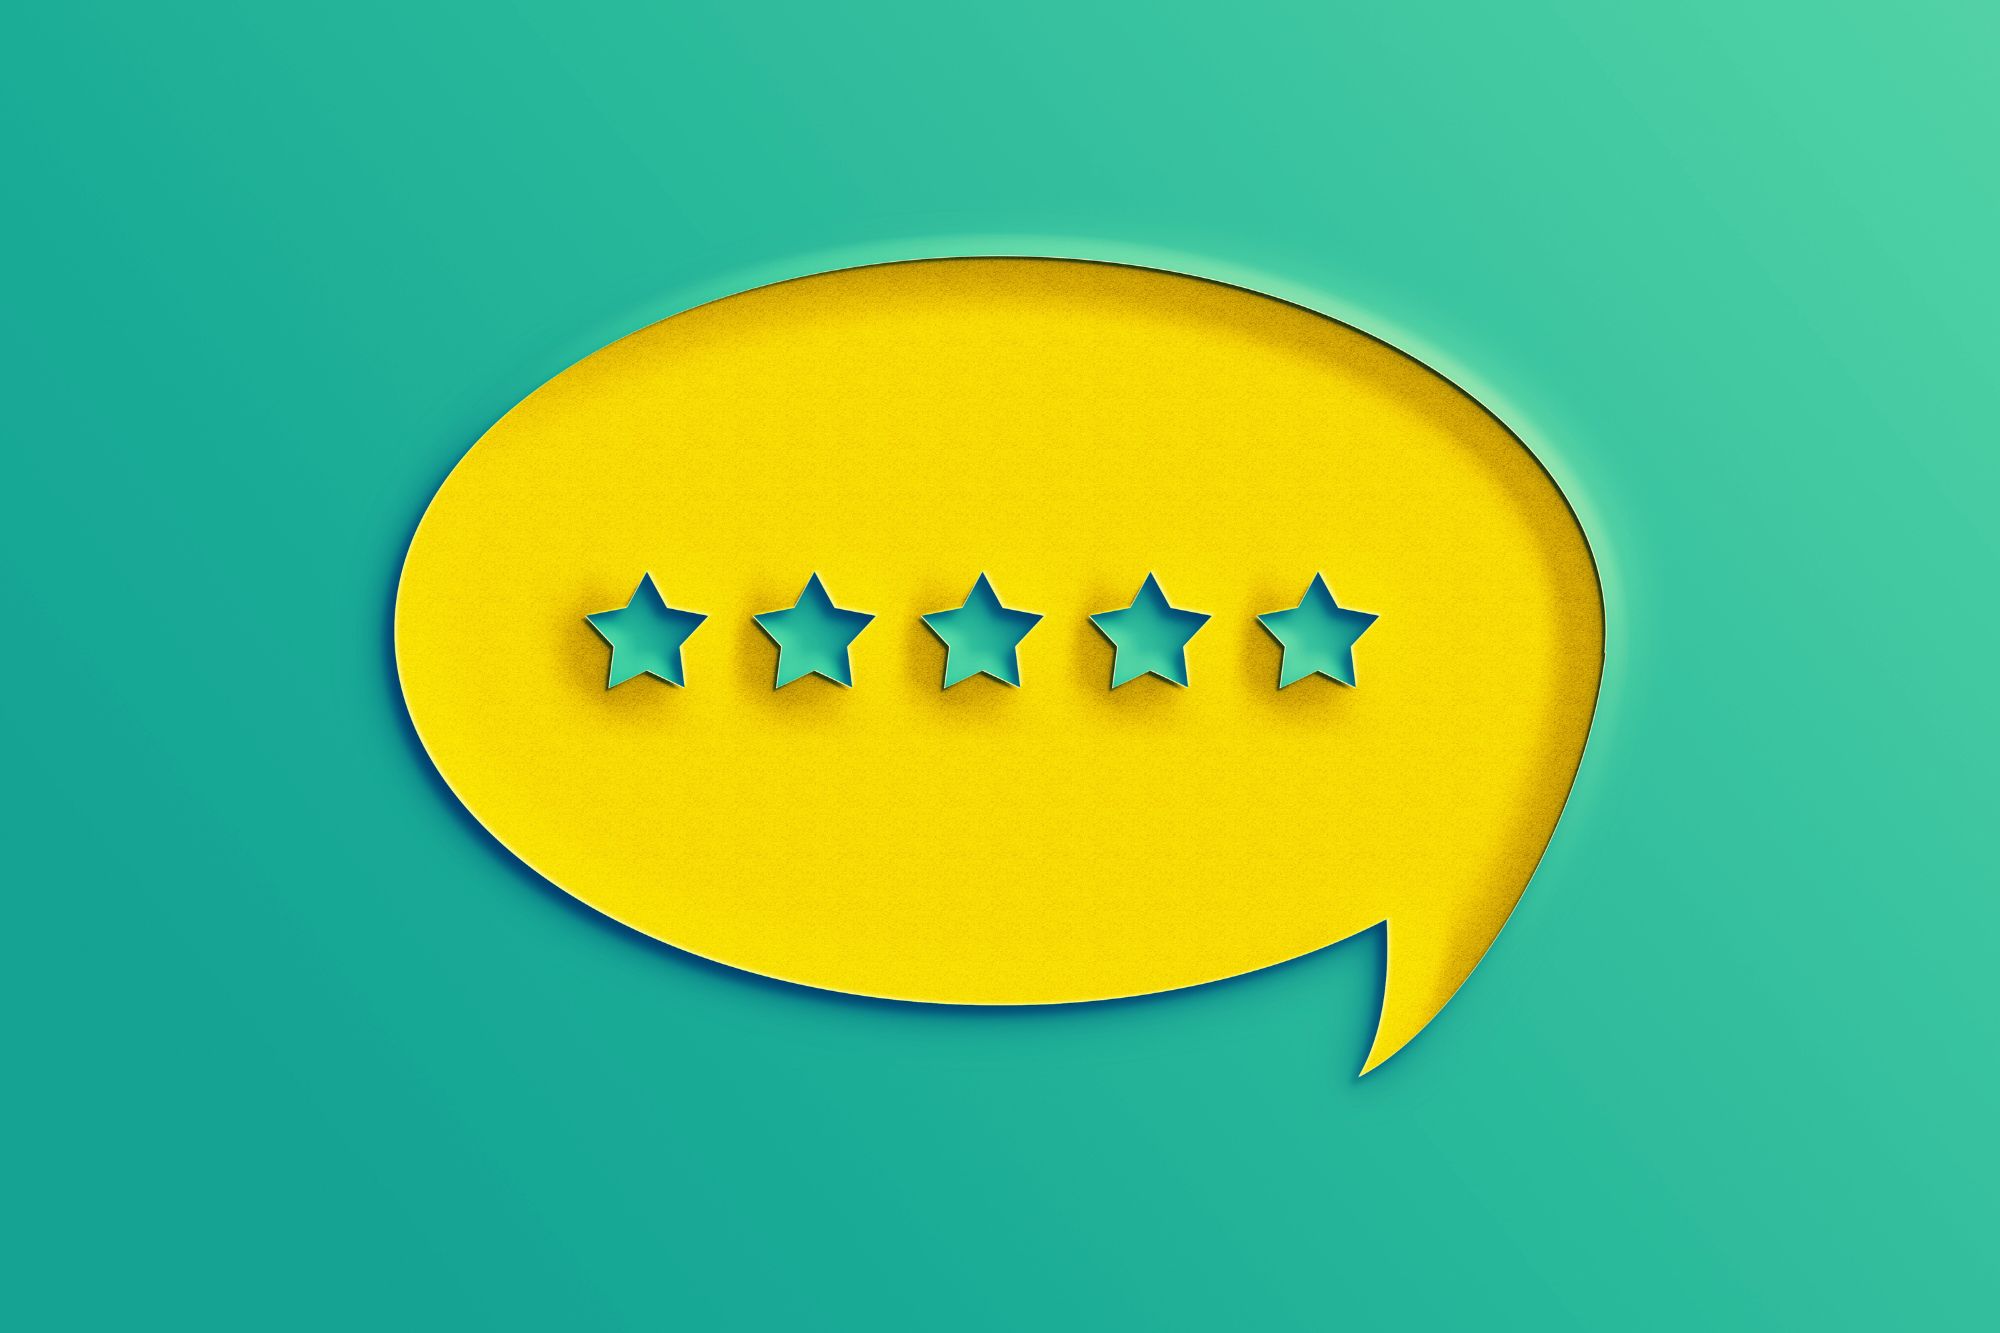 Online Reviews: 3 Powerful Ways They Impact Your Business